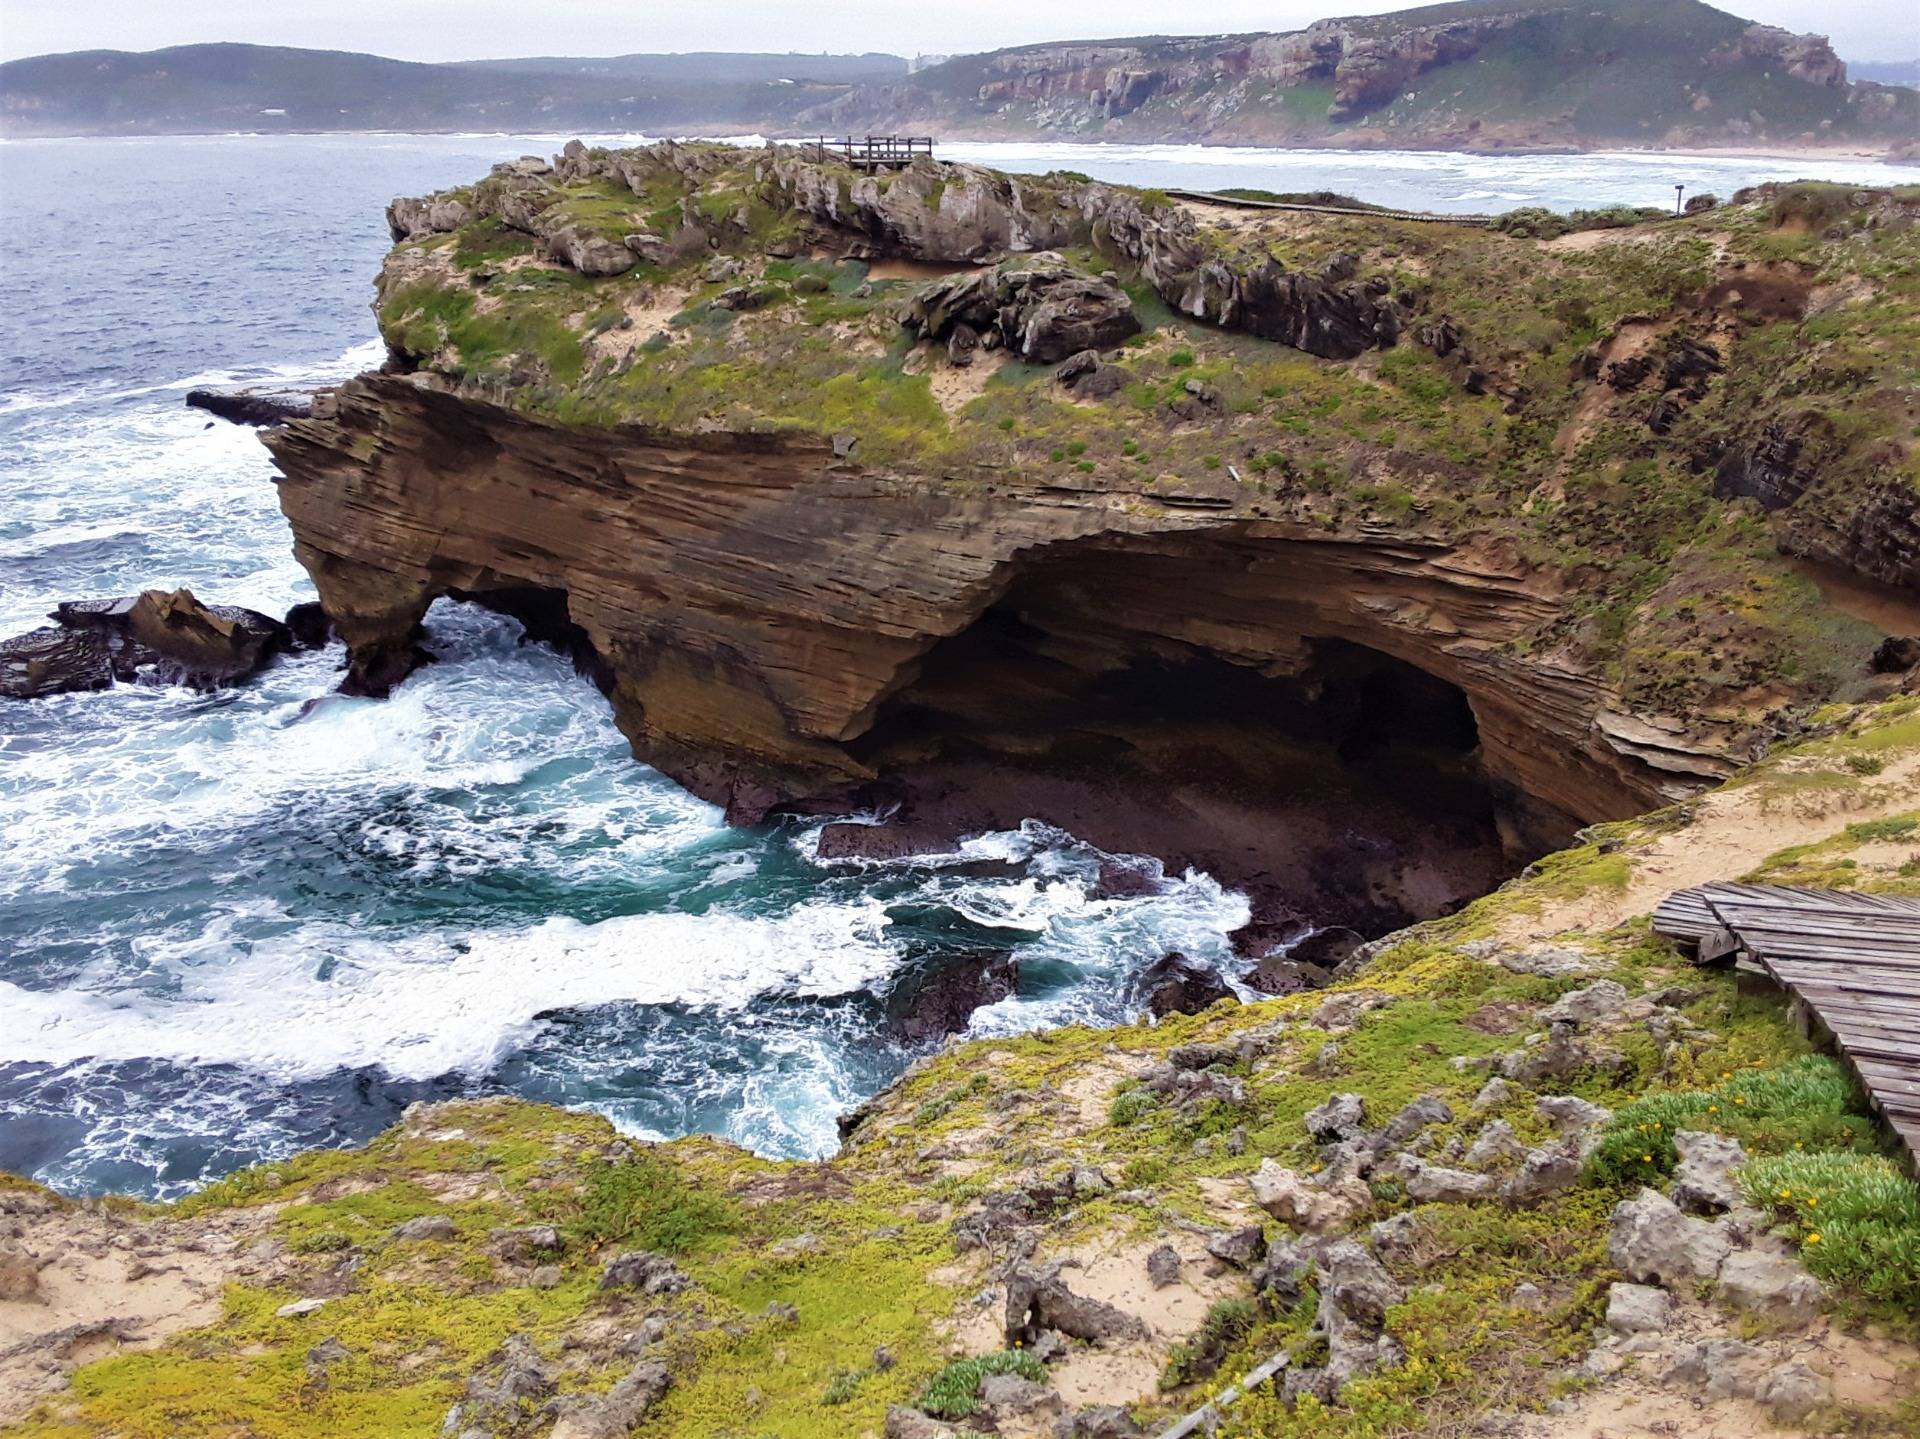 Epic sandstone rock caves weathered by wind and waves